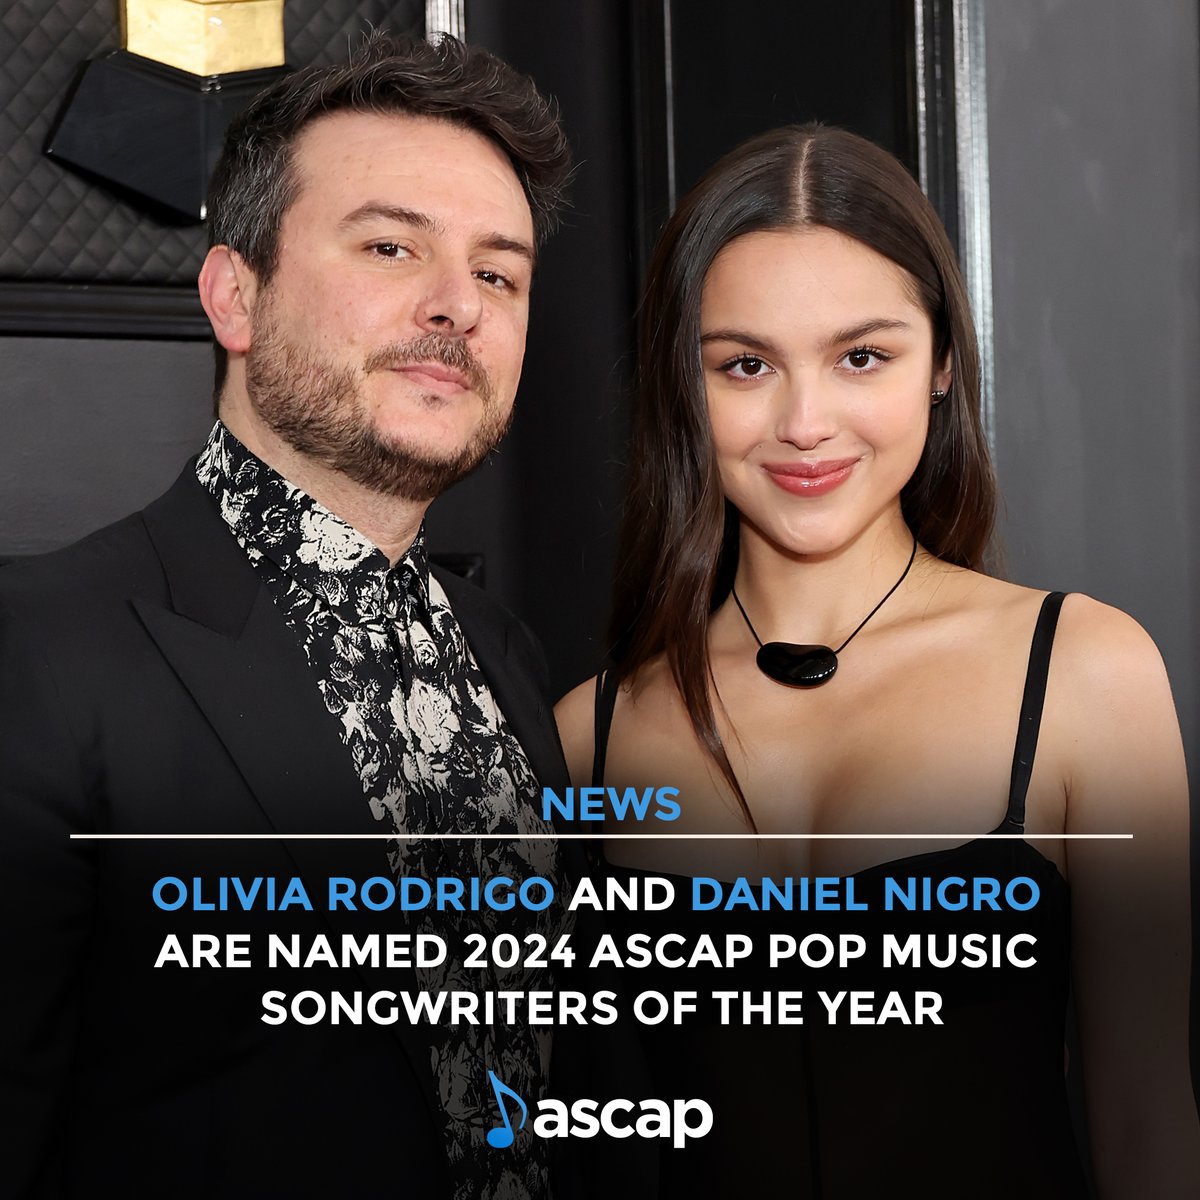 Olivia Rodrigo and Daniel Nigro are this year’s 🏆🏆 ASCAP Pop Music Songwriters of the Year! They ruled the pop charts in the past year with “vampire” and “bad idea right?” from Olivia’s sophomore album ‘GUTS’ #ASCAPAwards